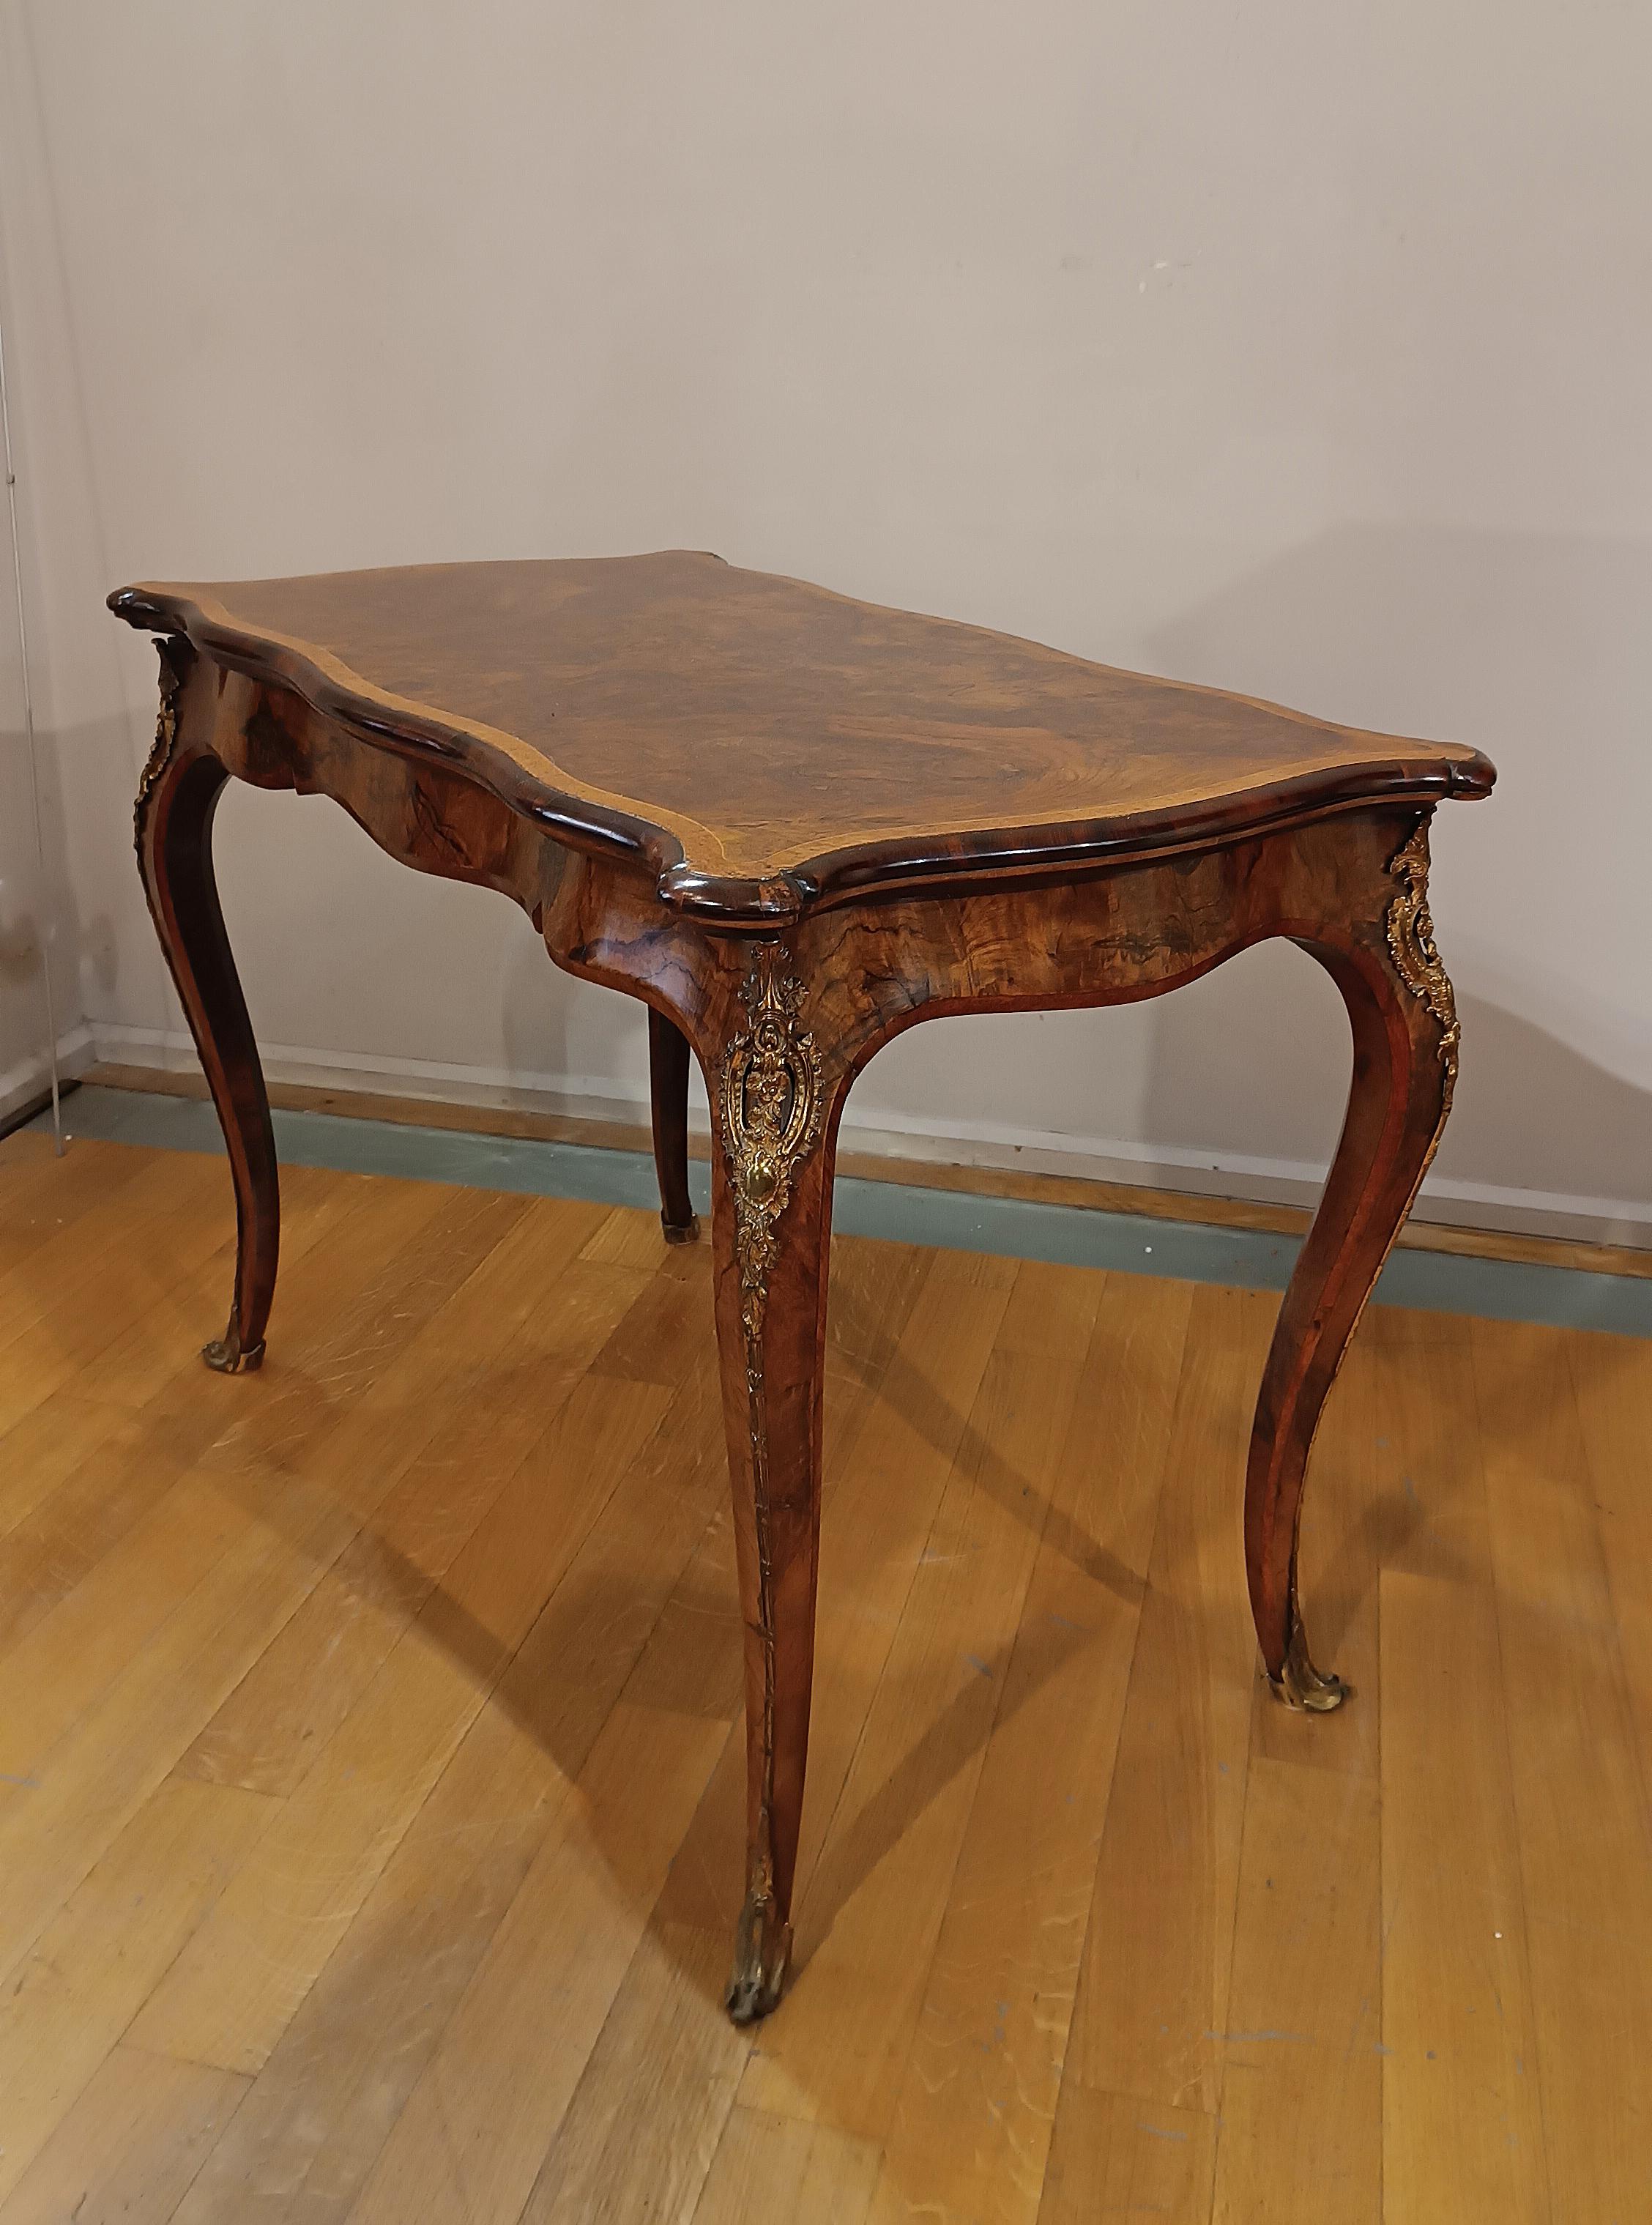 EARLY 19th CENTURY WALNUT BRIAR GAME TABLE For Sale 4